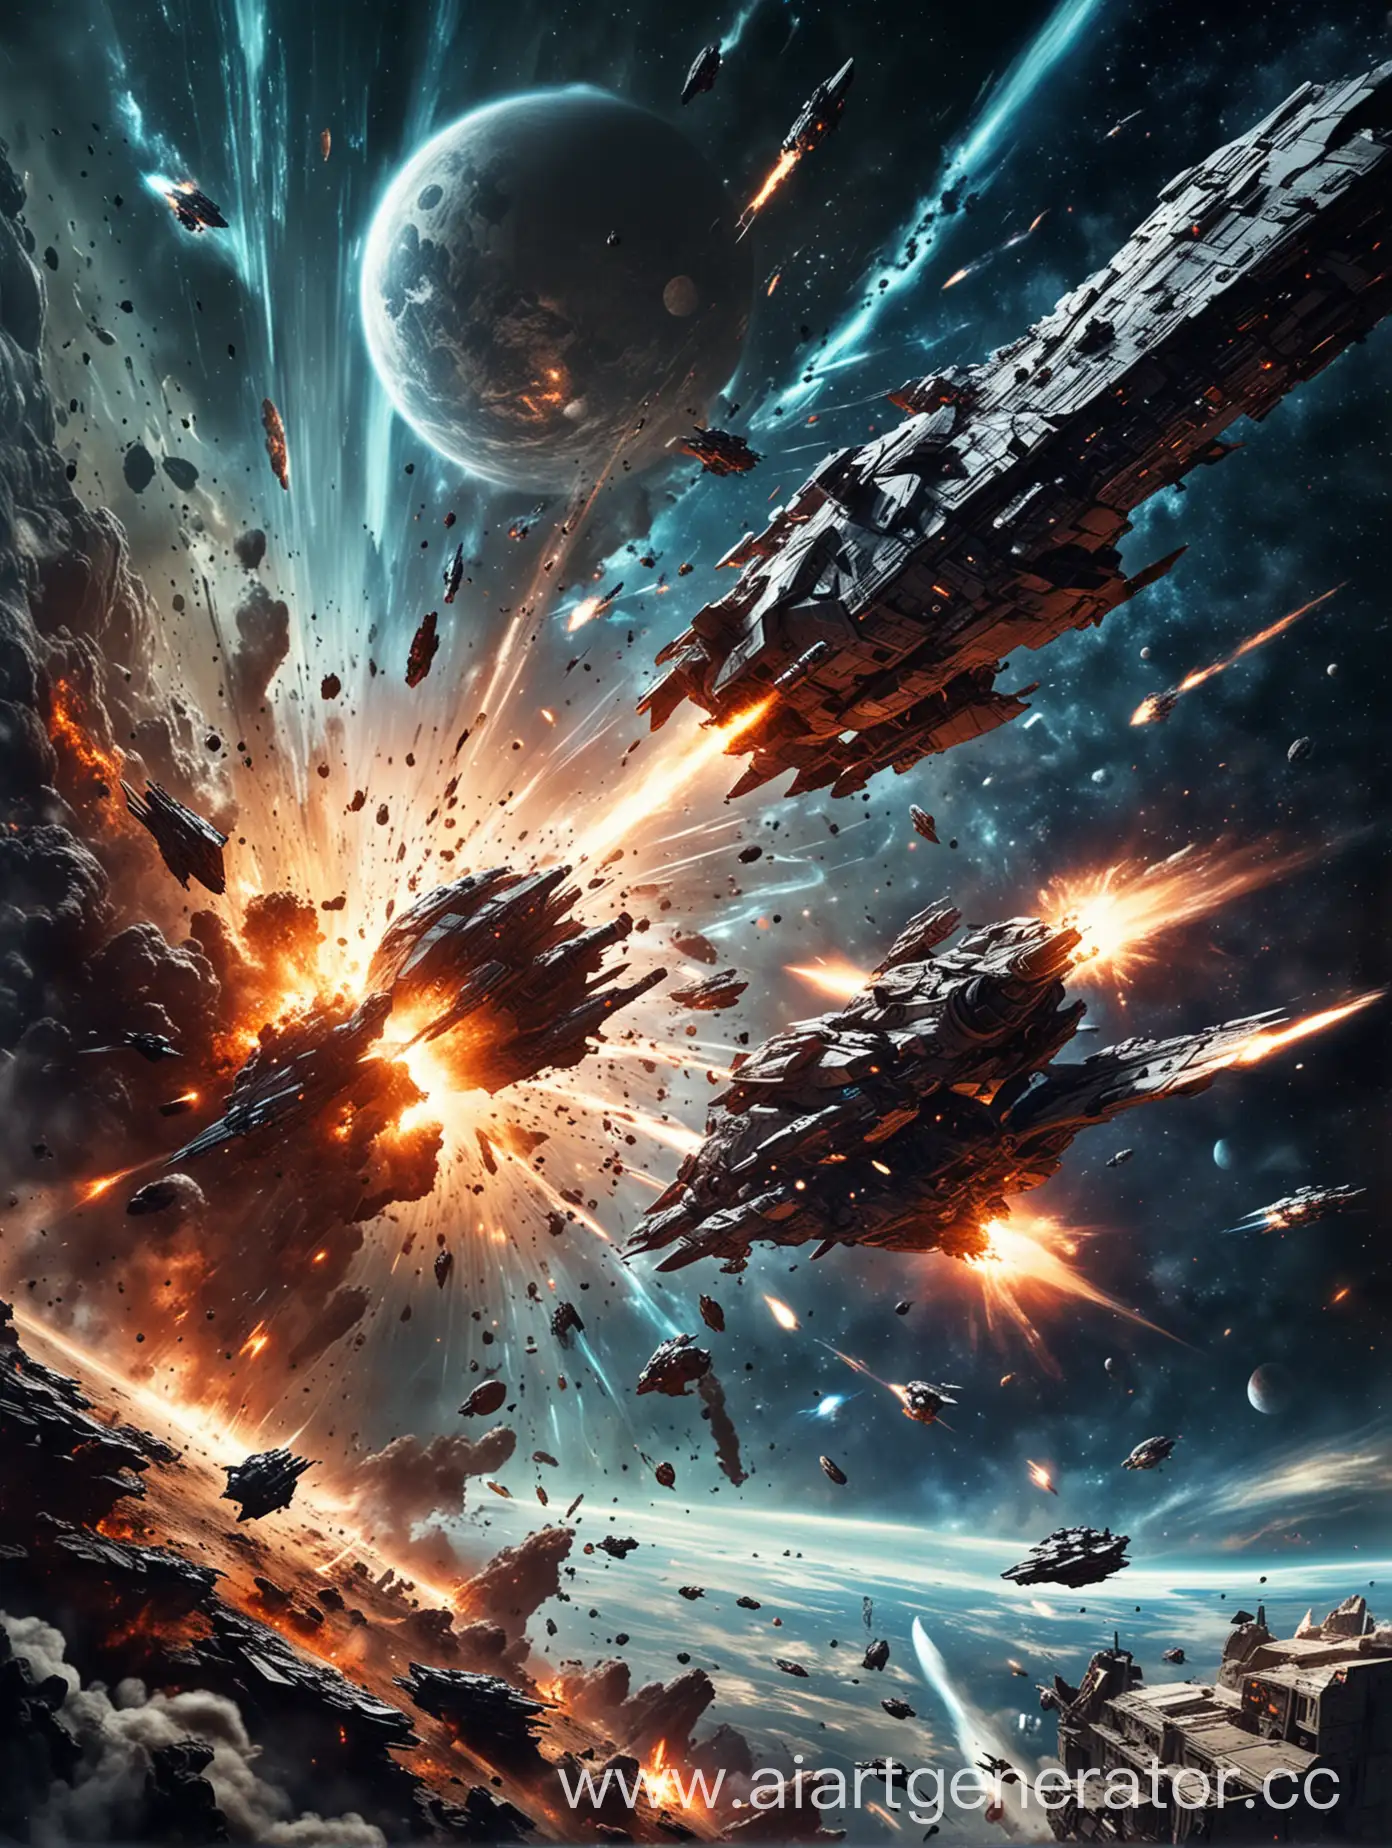 Intergalactic-Battle-Explosions-and-Space-Ships-Conquer-the-Cosmic-Sky